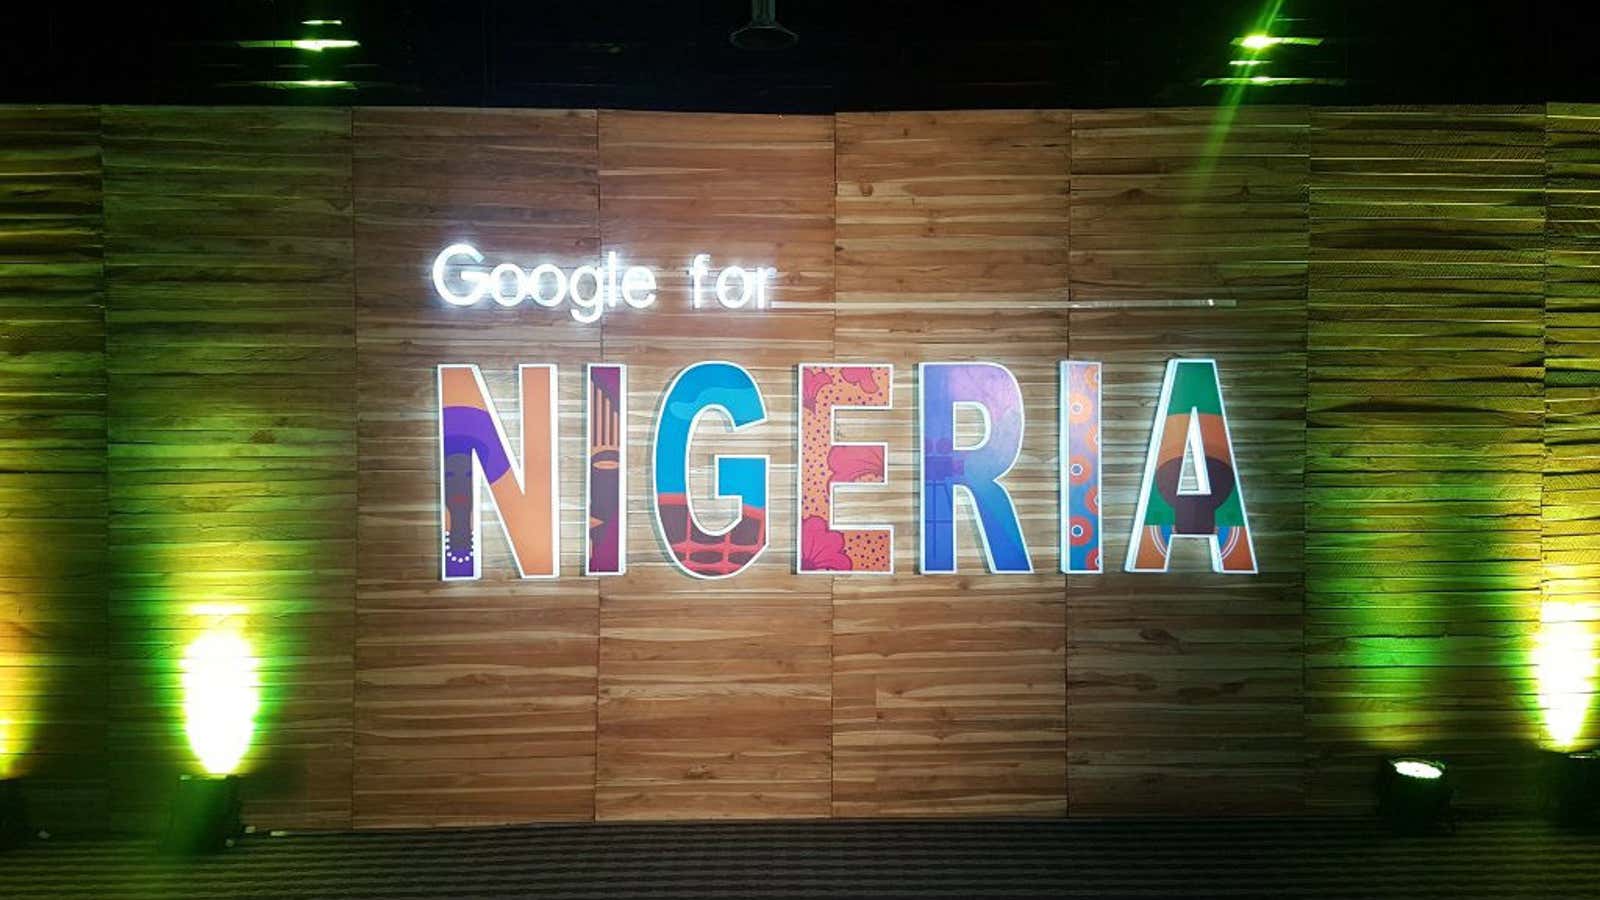 Welcome banner at Google For Nigeria event held at the Landmark Event Center in Lagos on July 27 2017